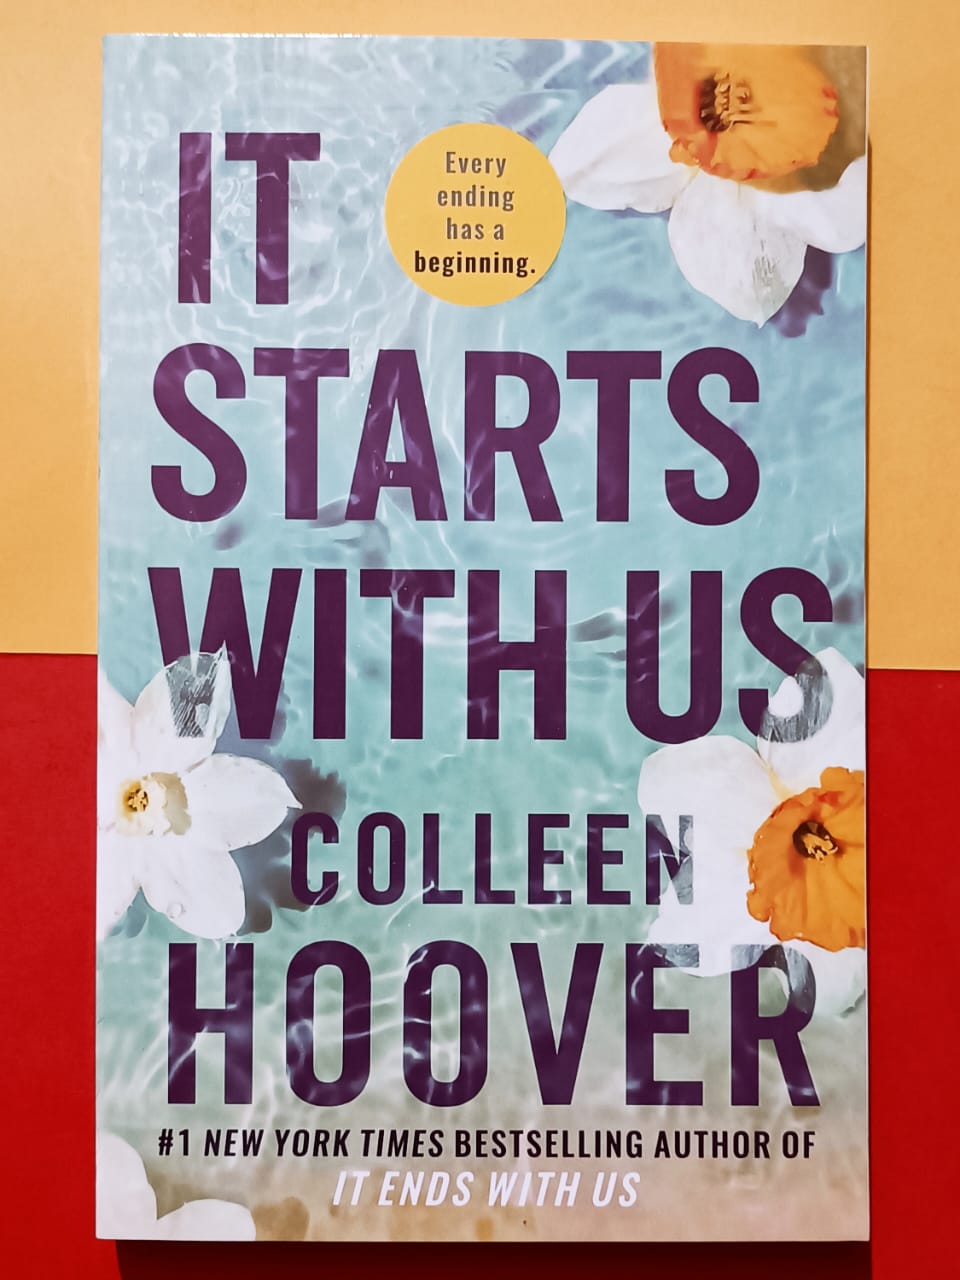 It Starts With Us (Lily and Atlas's Story) by Colleen Hoover Book